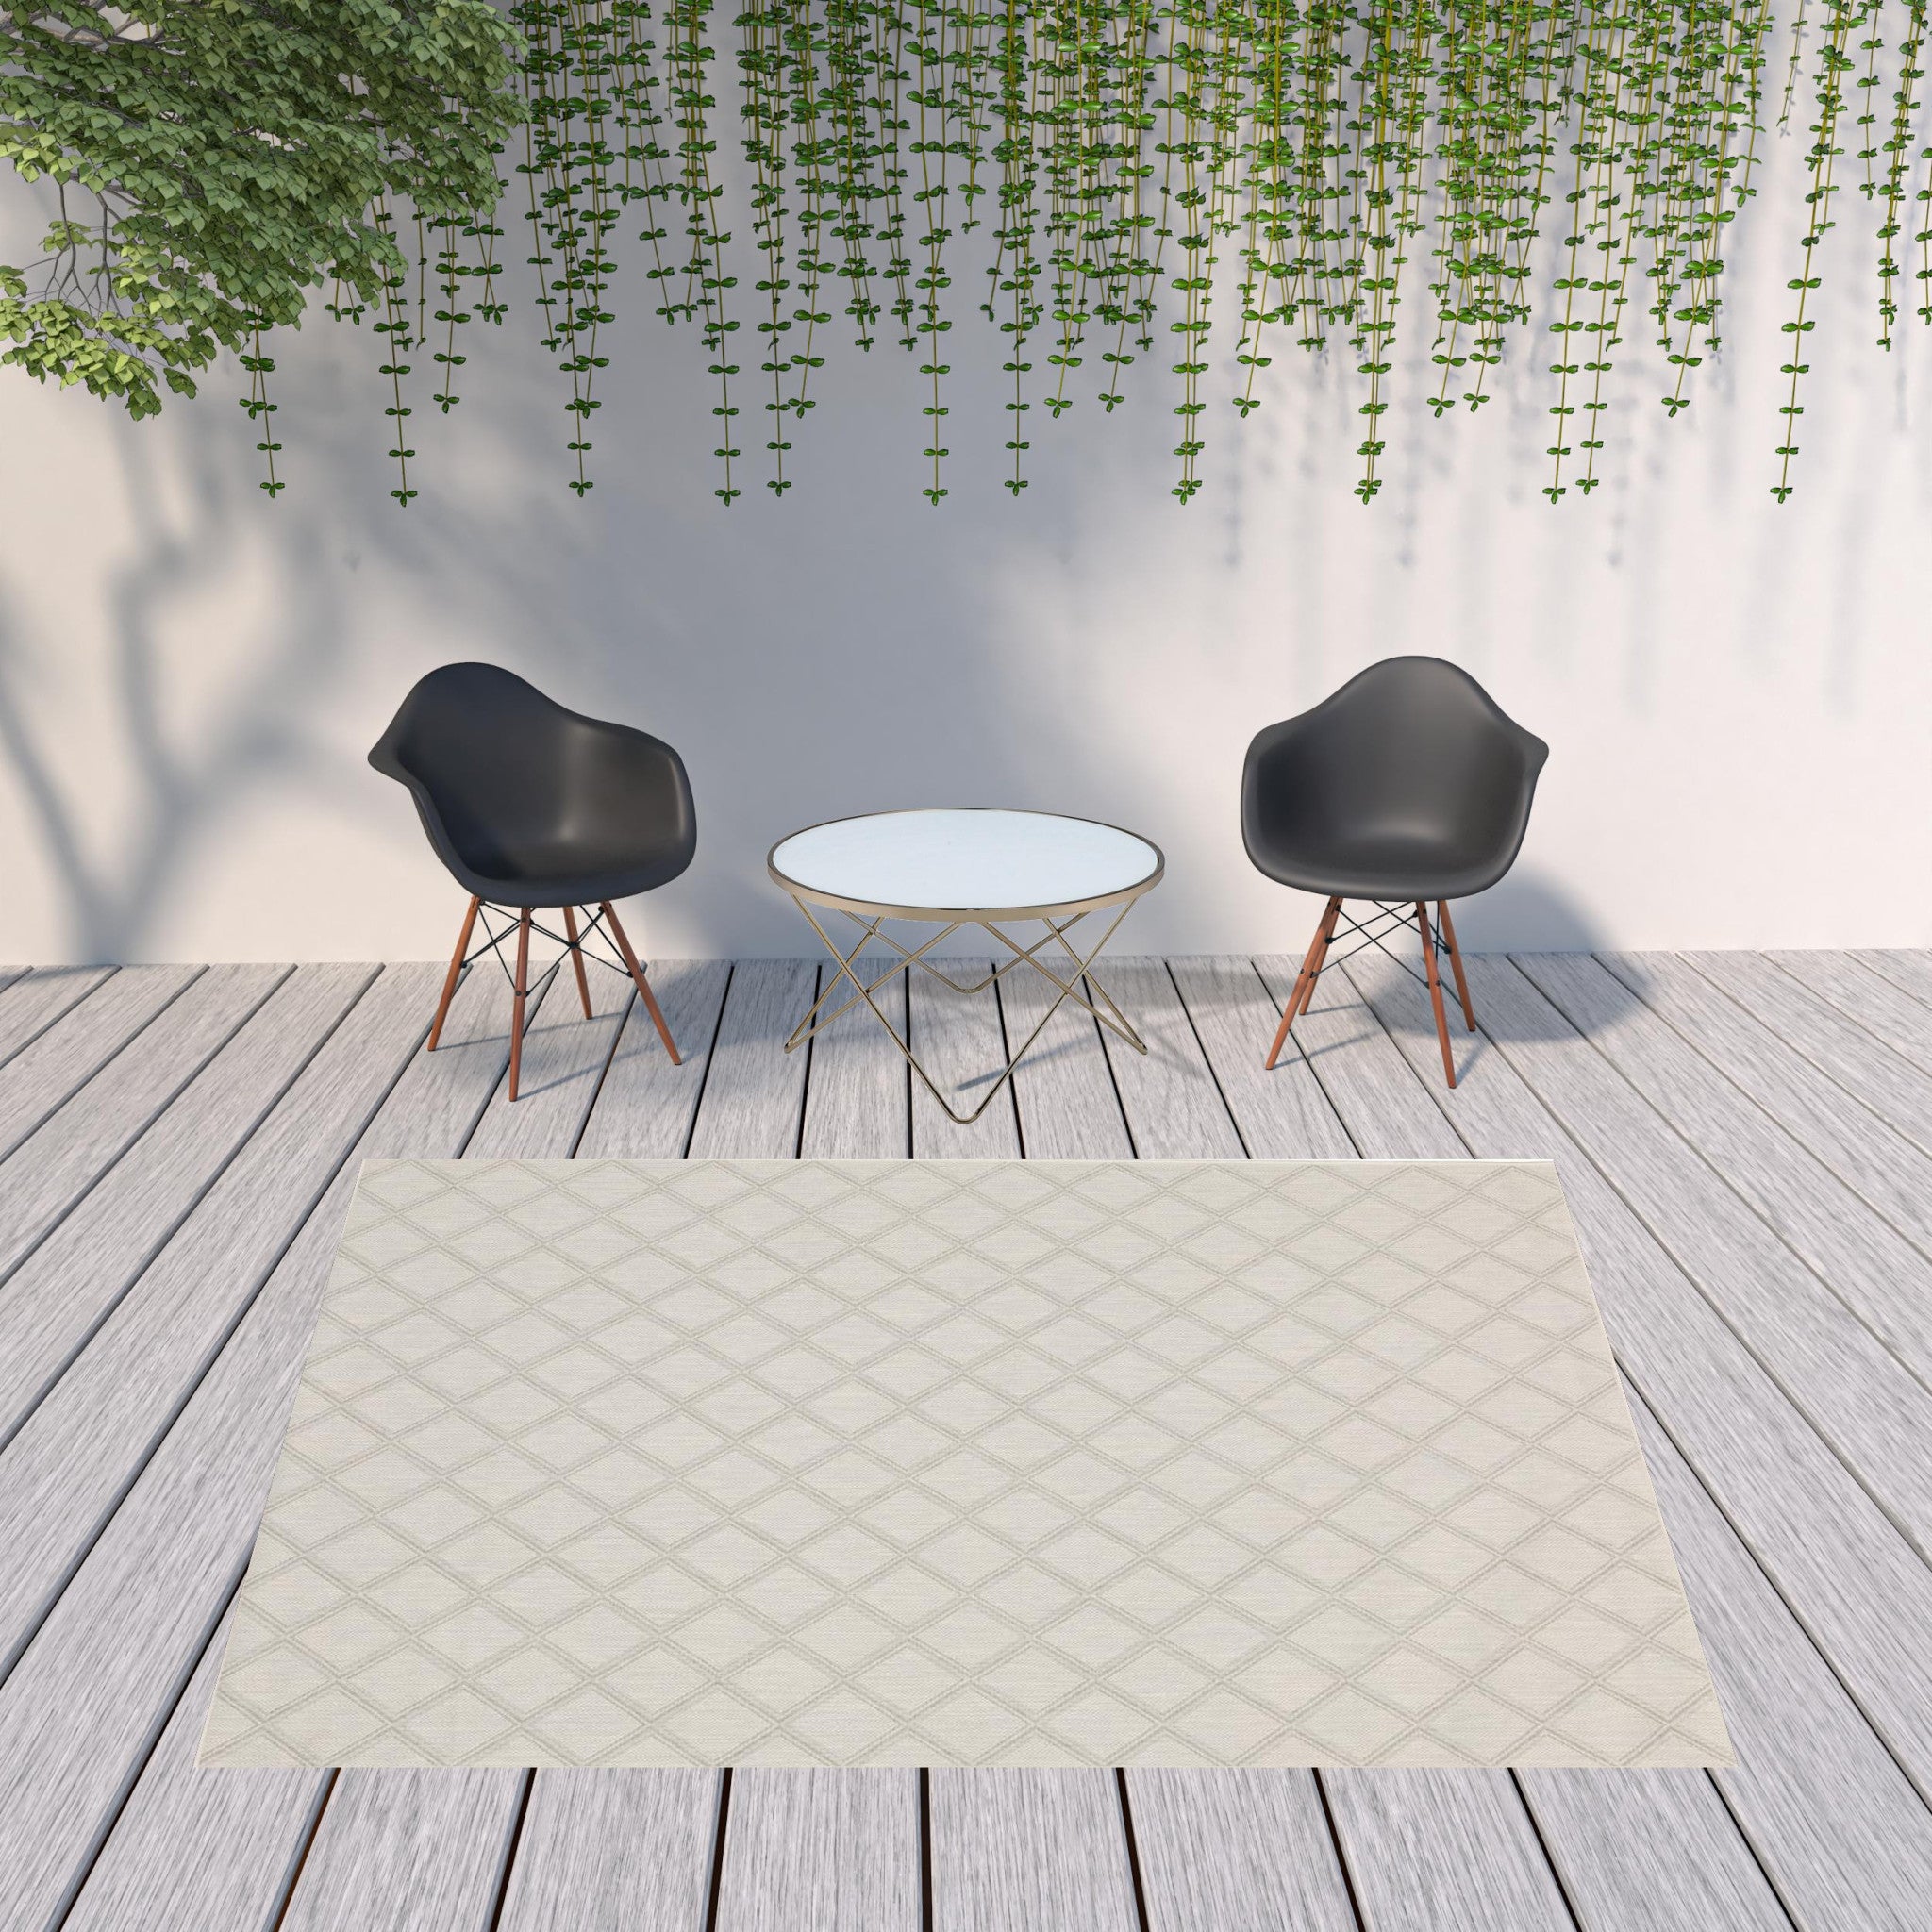 8' x 10' Gray and Ivory Geometric Stain Resistant Indoor Outdoor Area Rug